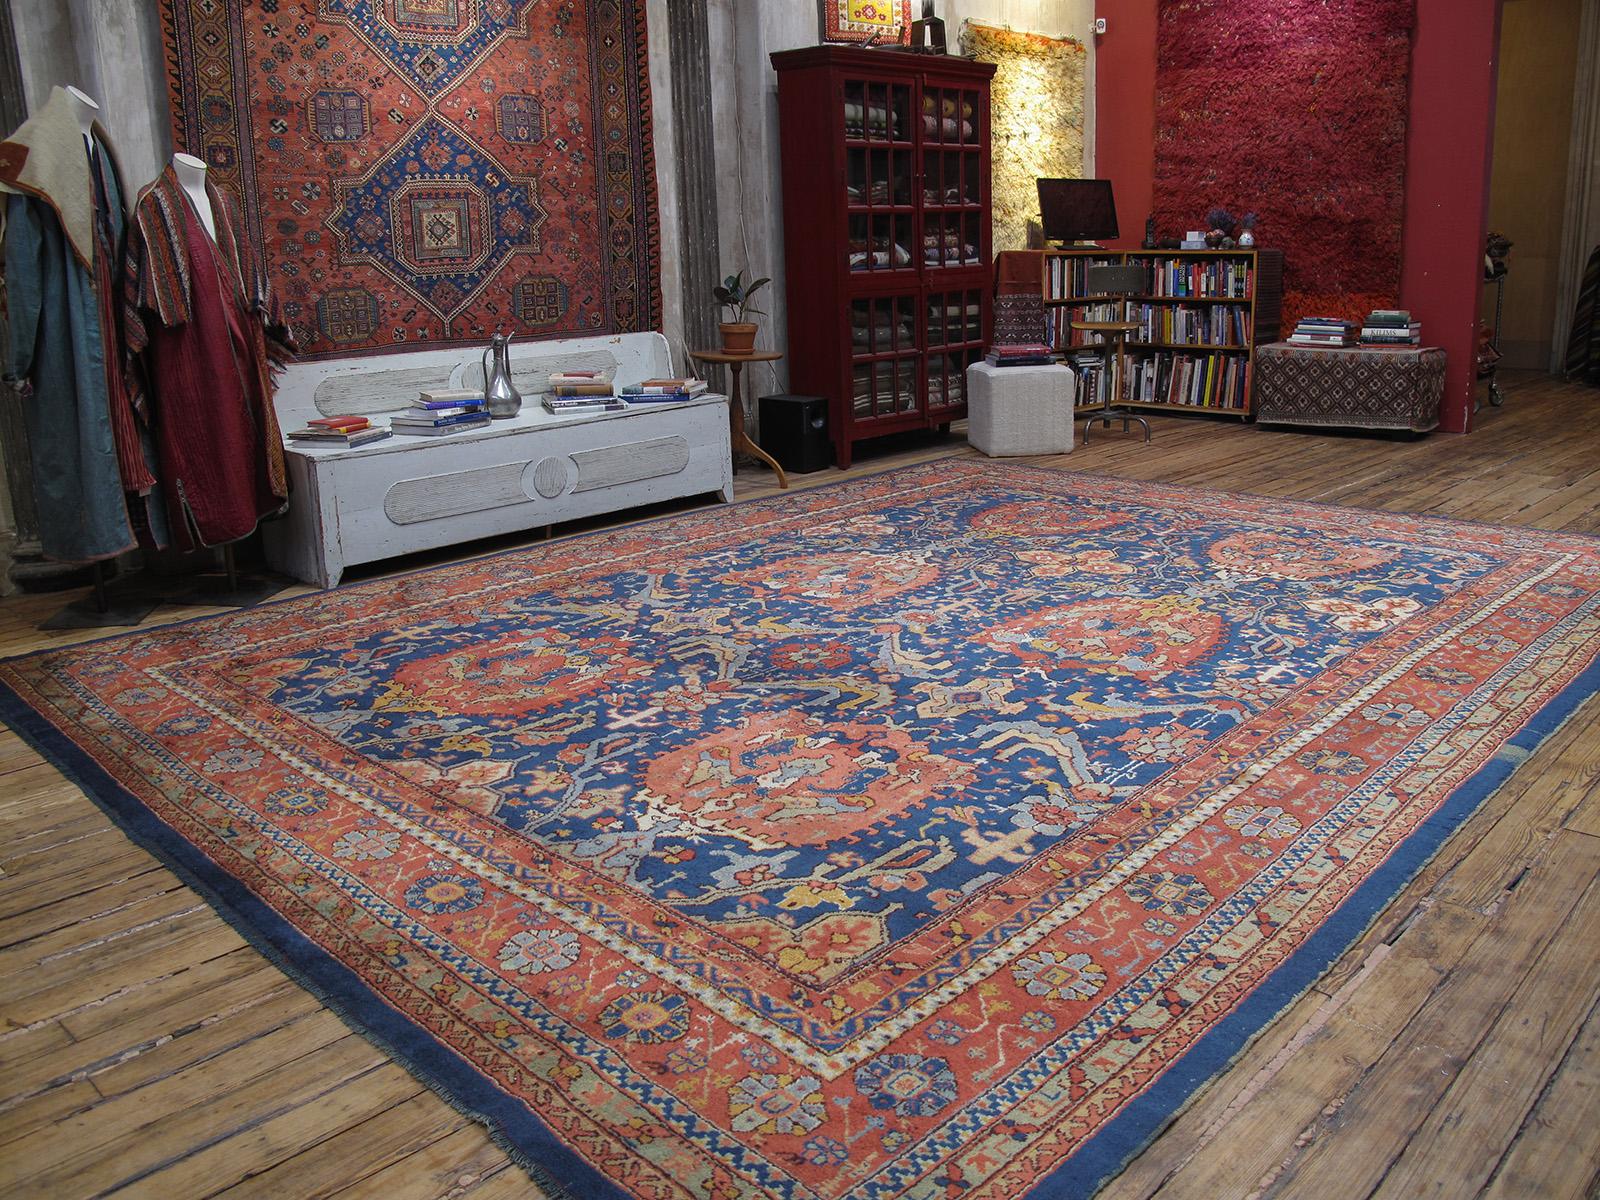 A beautiful antique carpet from the prolific Oushak region in Western Turkey, featuring a well-known design, at least since the seventeenth century. The design is often referred to as 